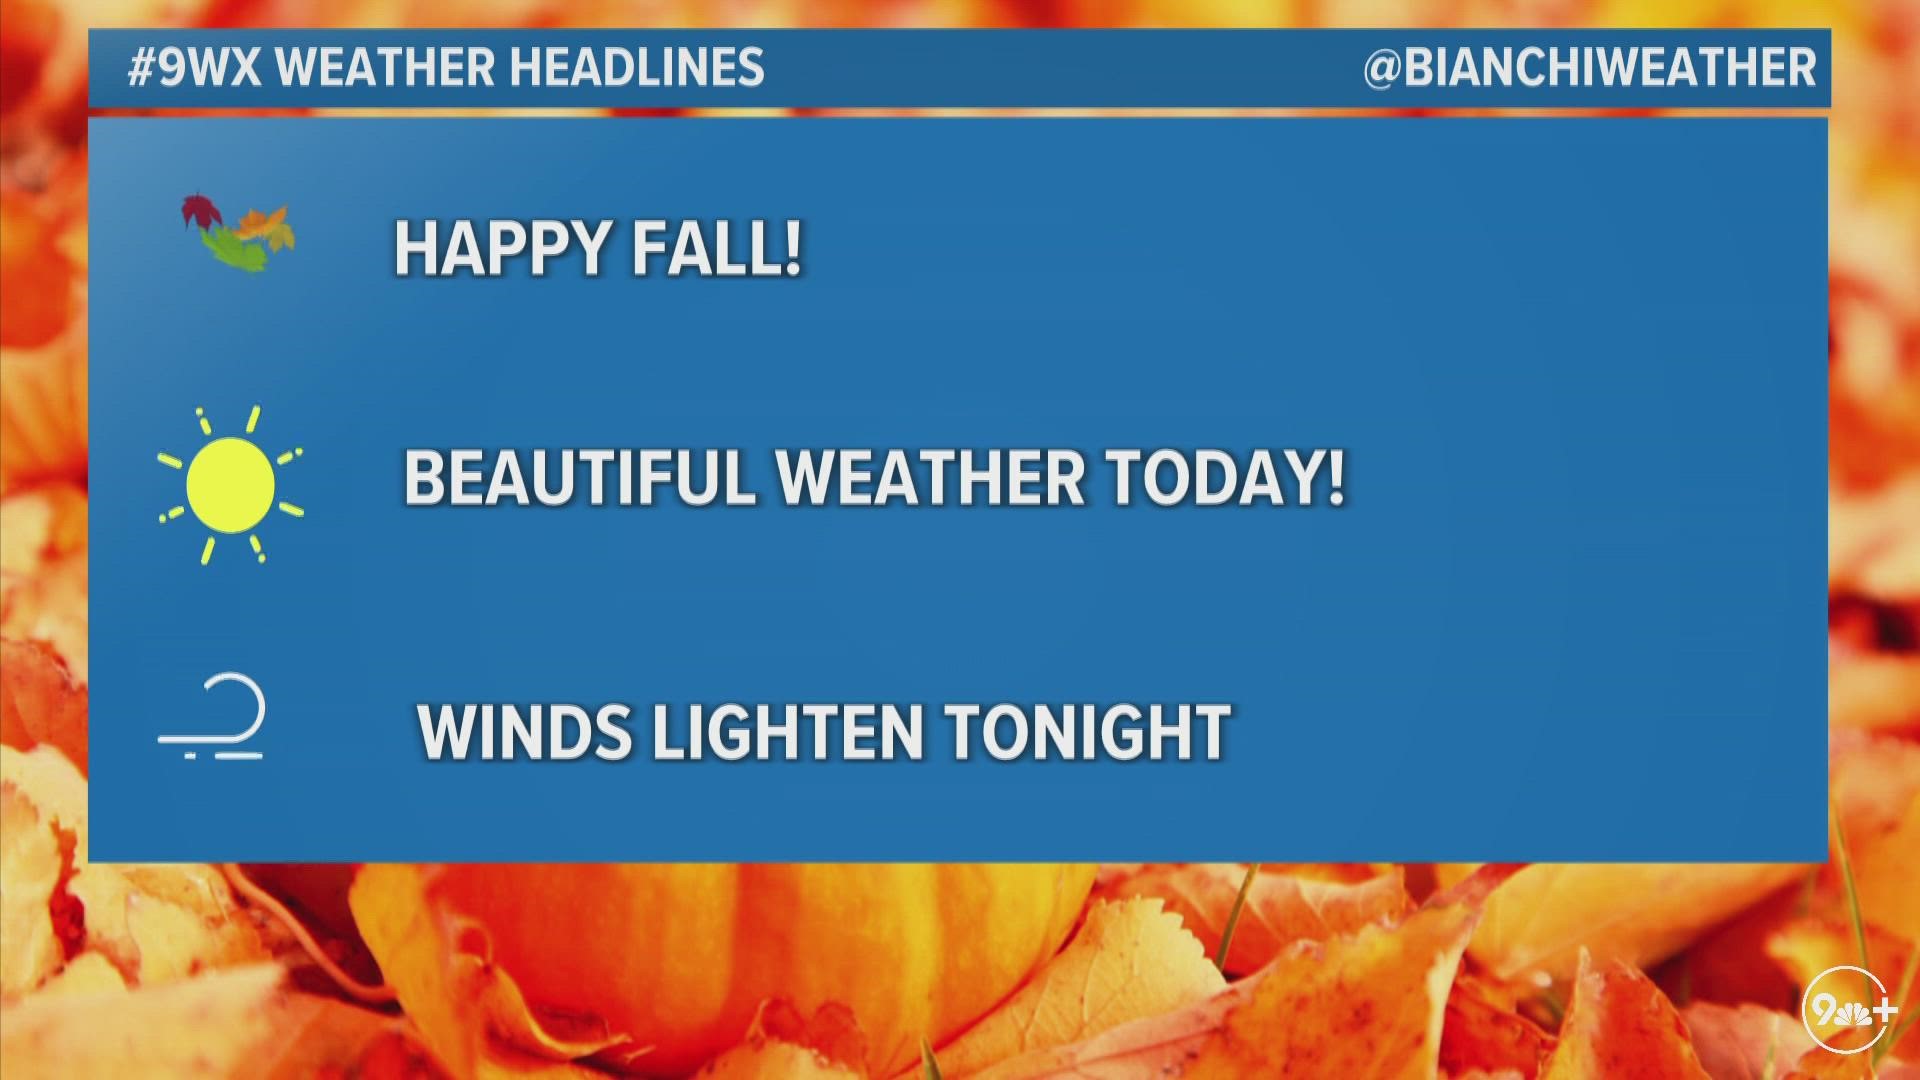 Chris Bianchi has your weekend weather forecast.